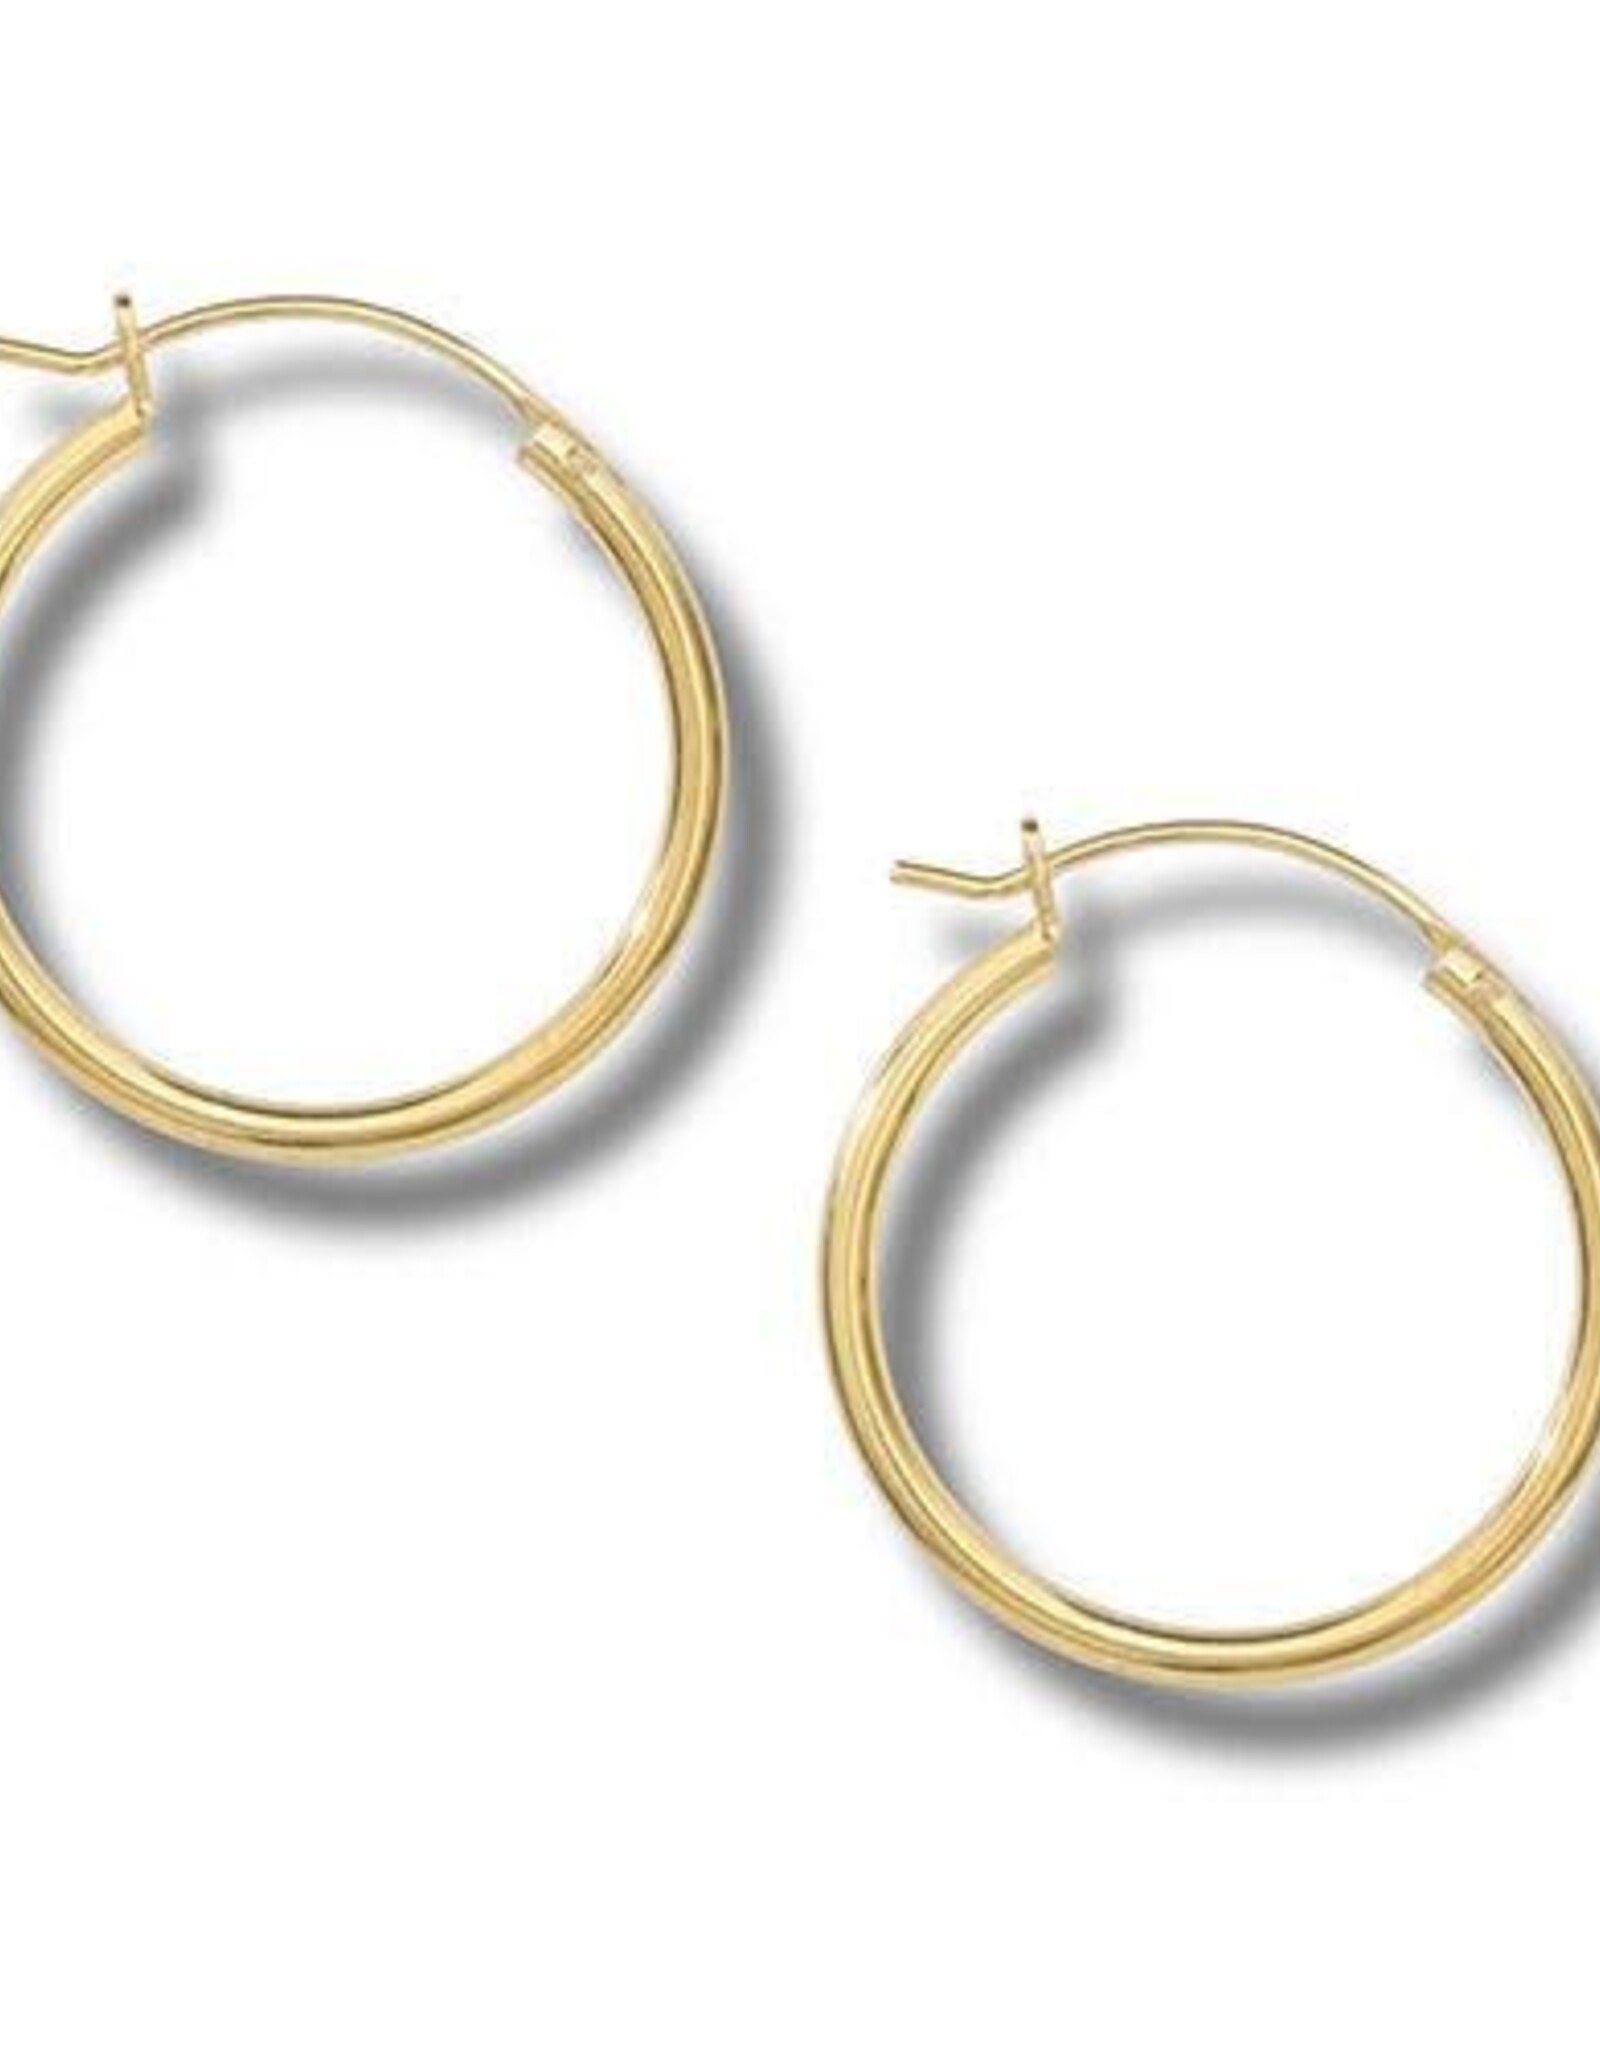 Good Collective 25MM SMOOTH GOLD HOOP EARRINGS - Tomas